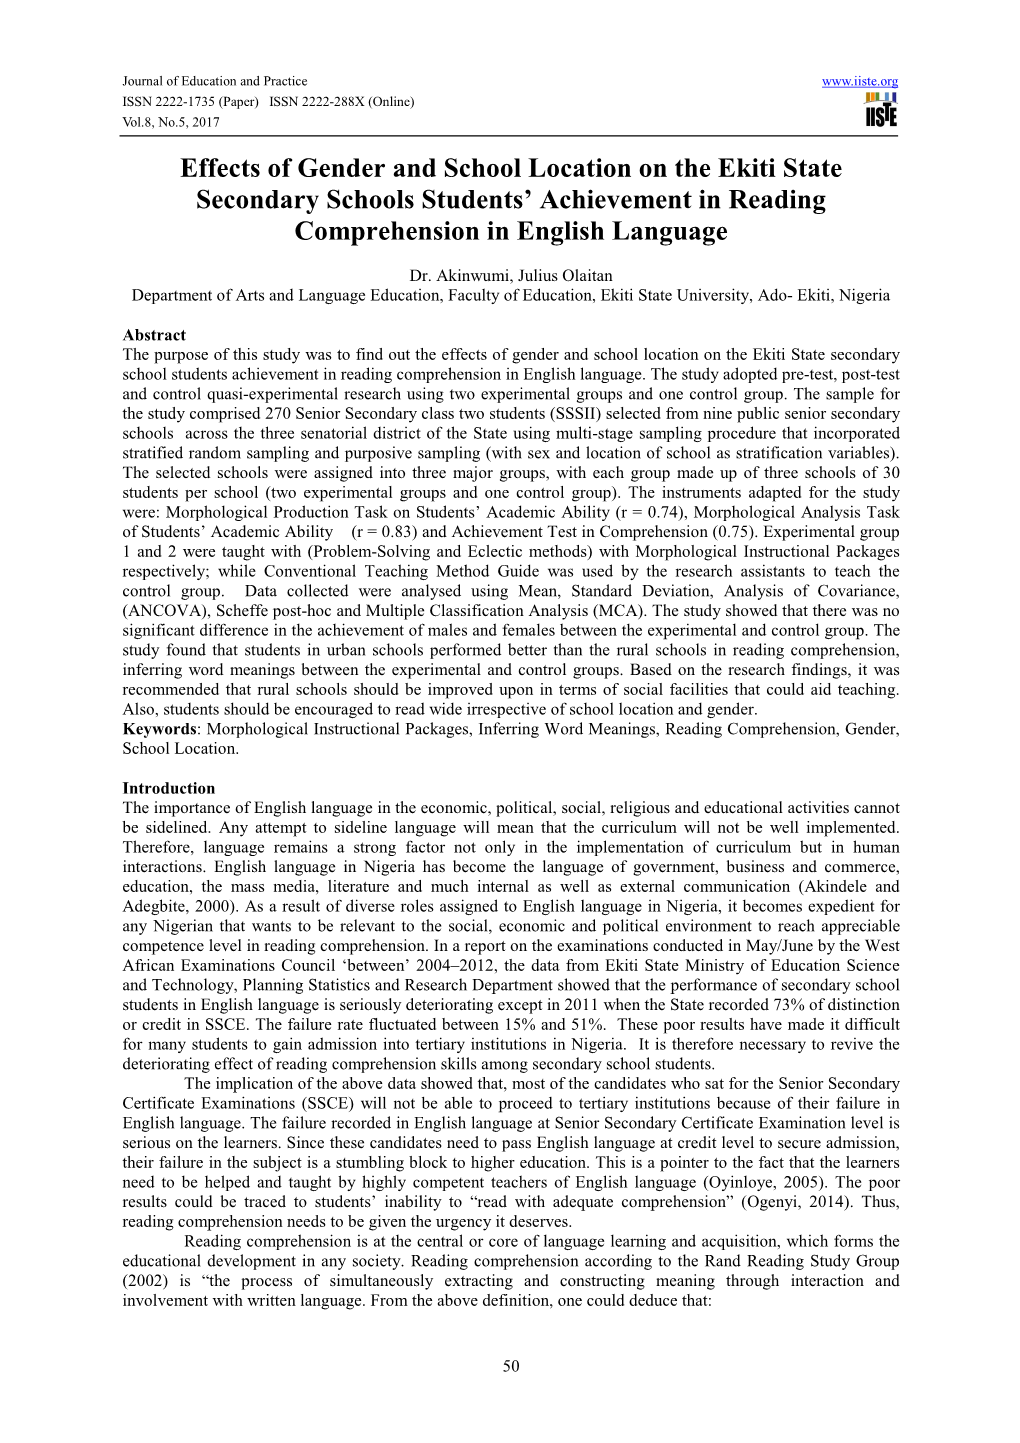 Effects of Gender and School Location on the Ekiti State Secondary Schools Students’ Achievement in Reading Comprehension in English Language